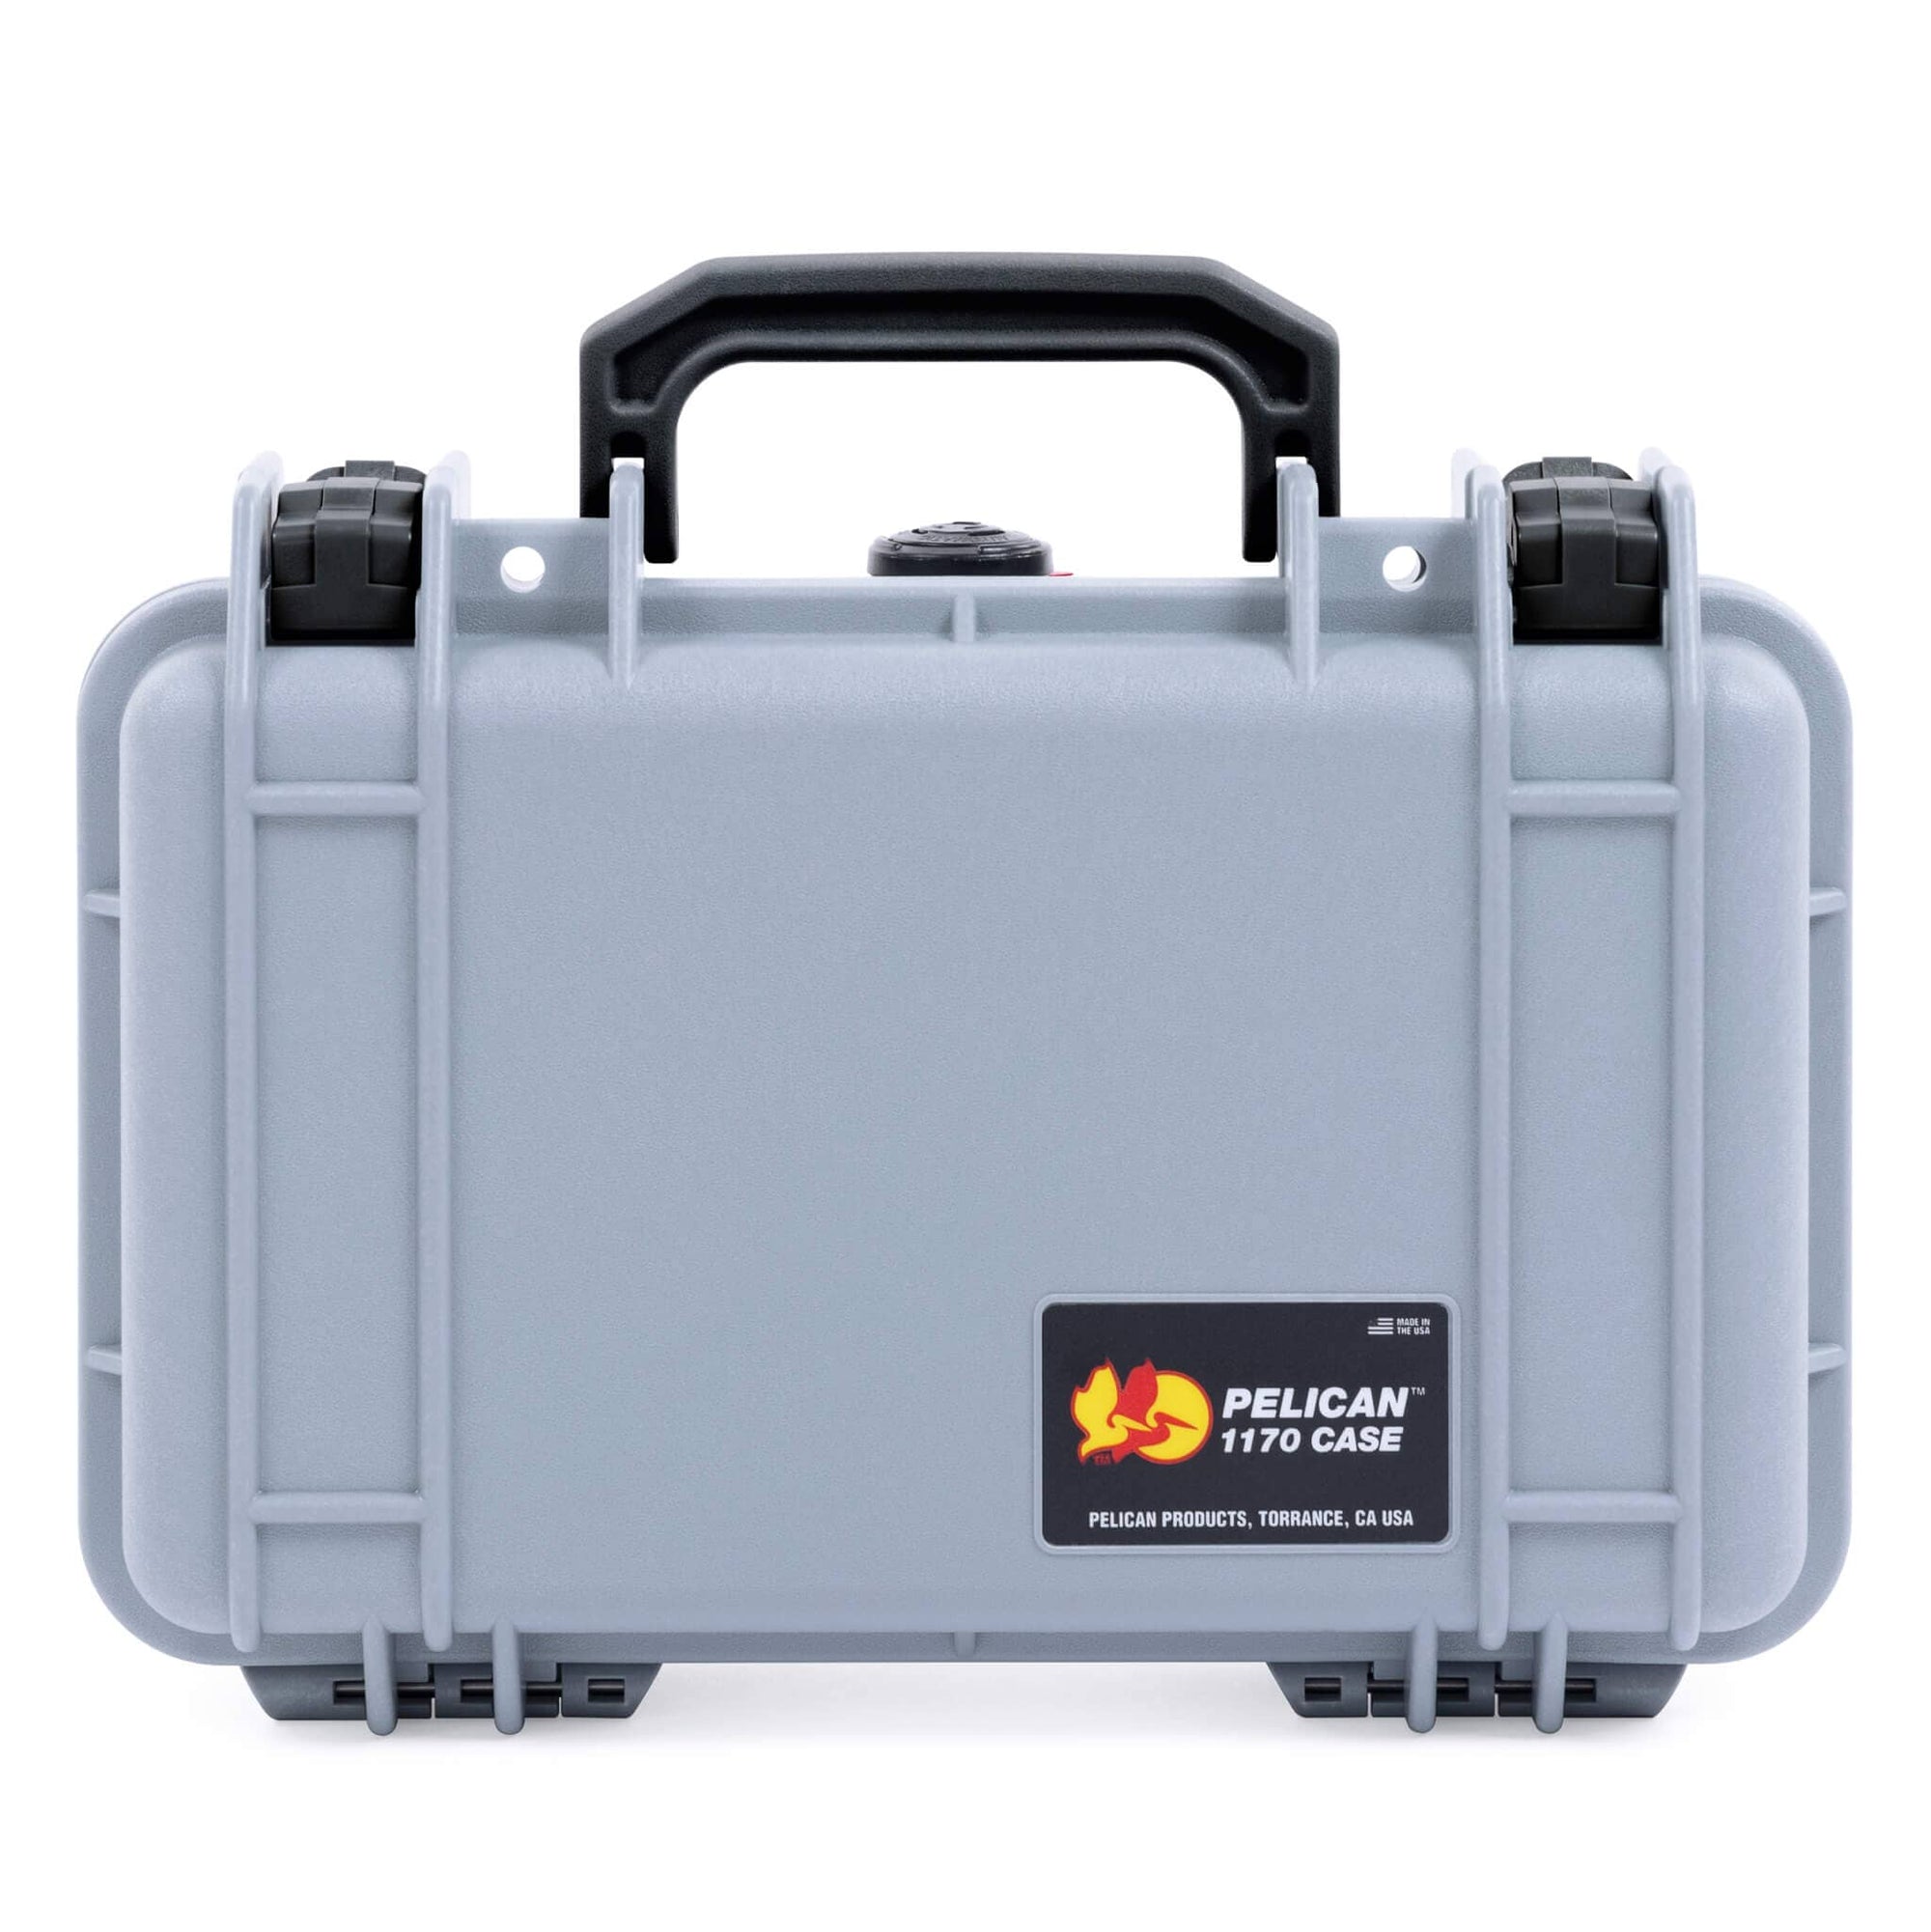 Pelican 1170 Case, Silver with Black Handle & Latches ColorCase 